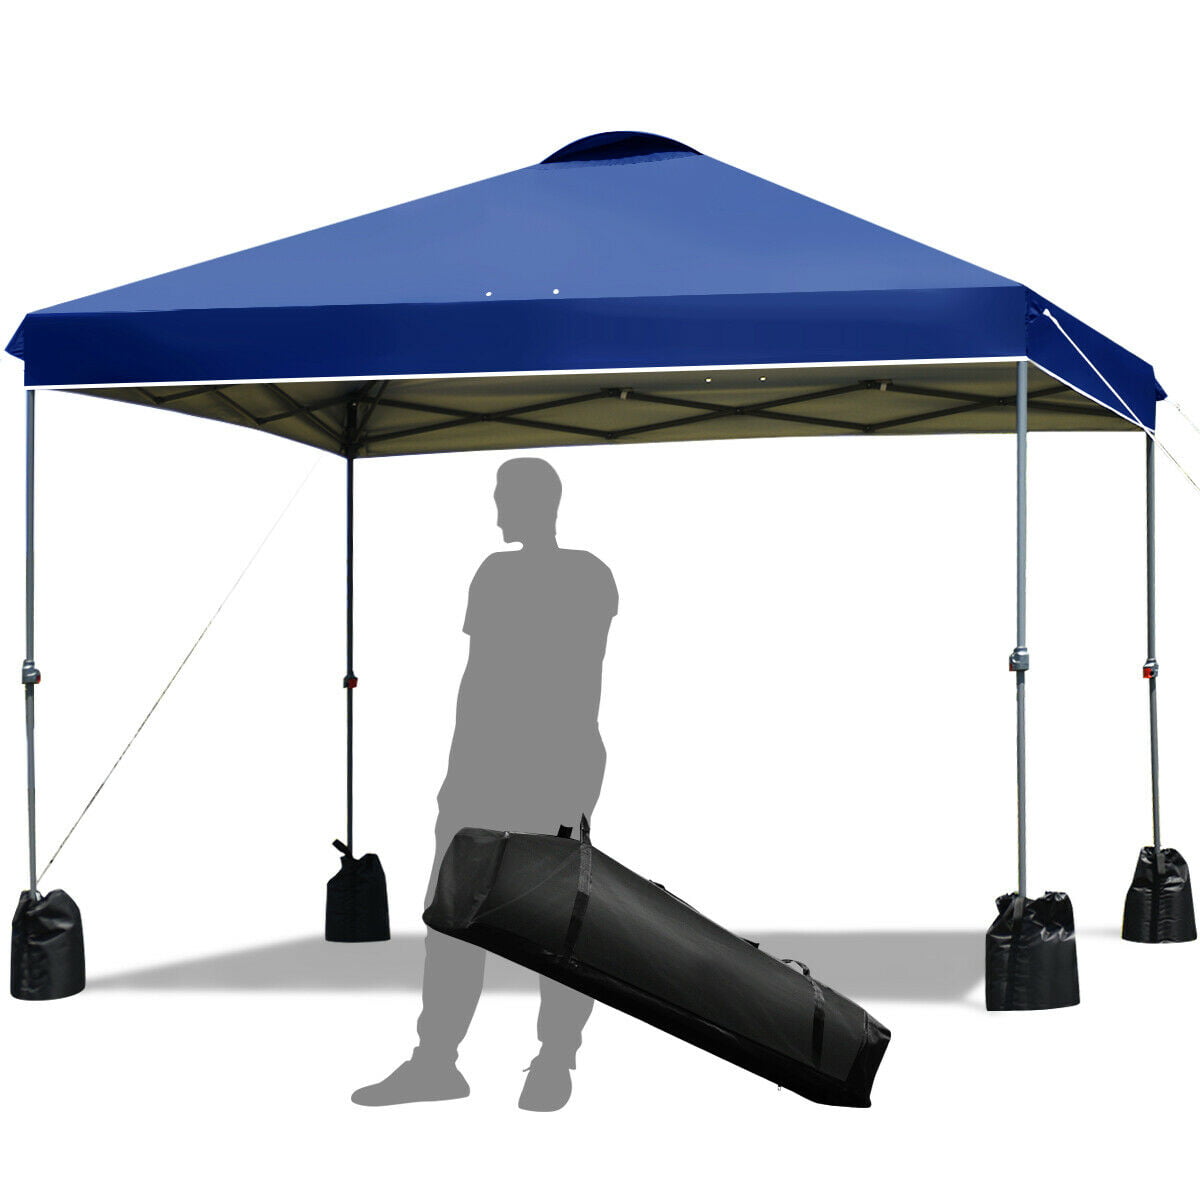 8 Colors Quictent Silvox 10x10 EZ Pop Up Canopy Party Tent Instant Gazebo Waterproof with 4 Sides & Roller Bag